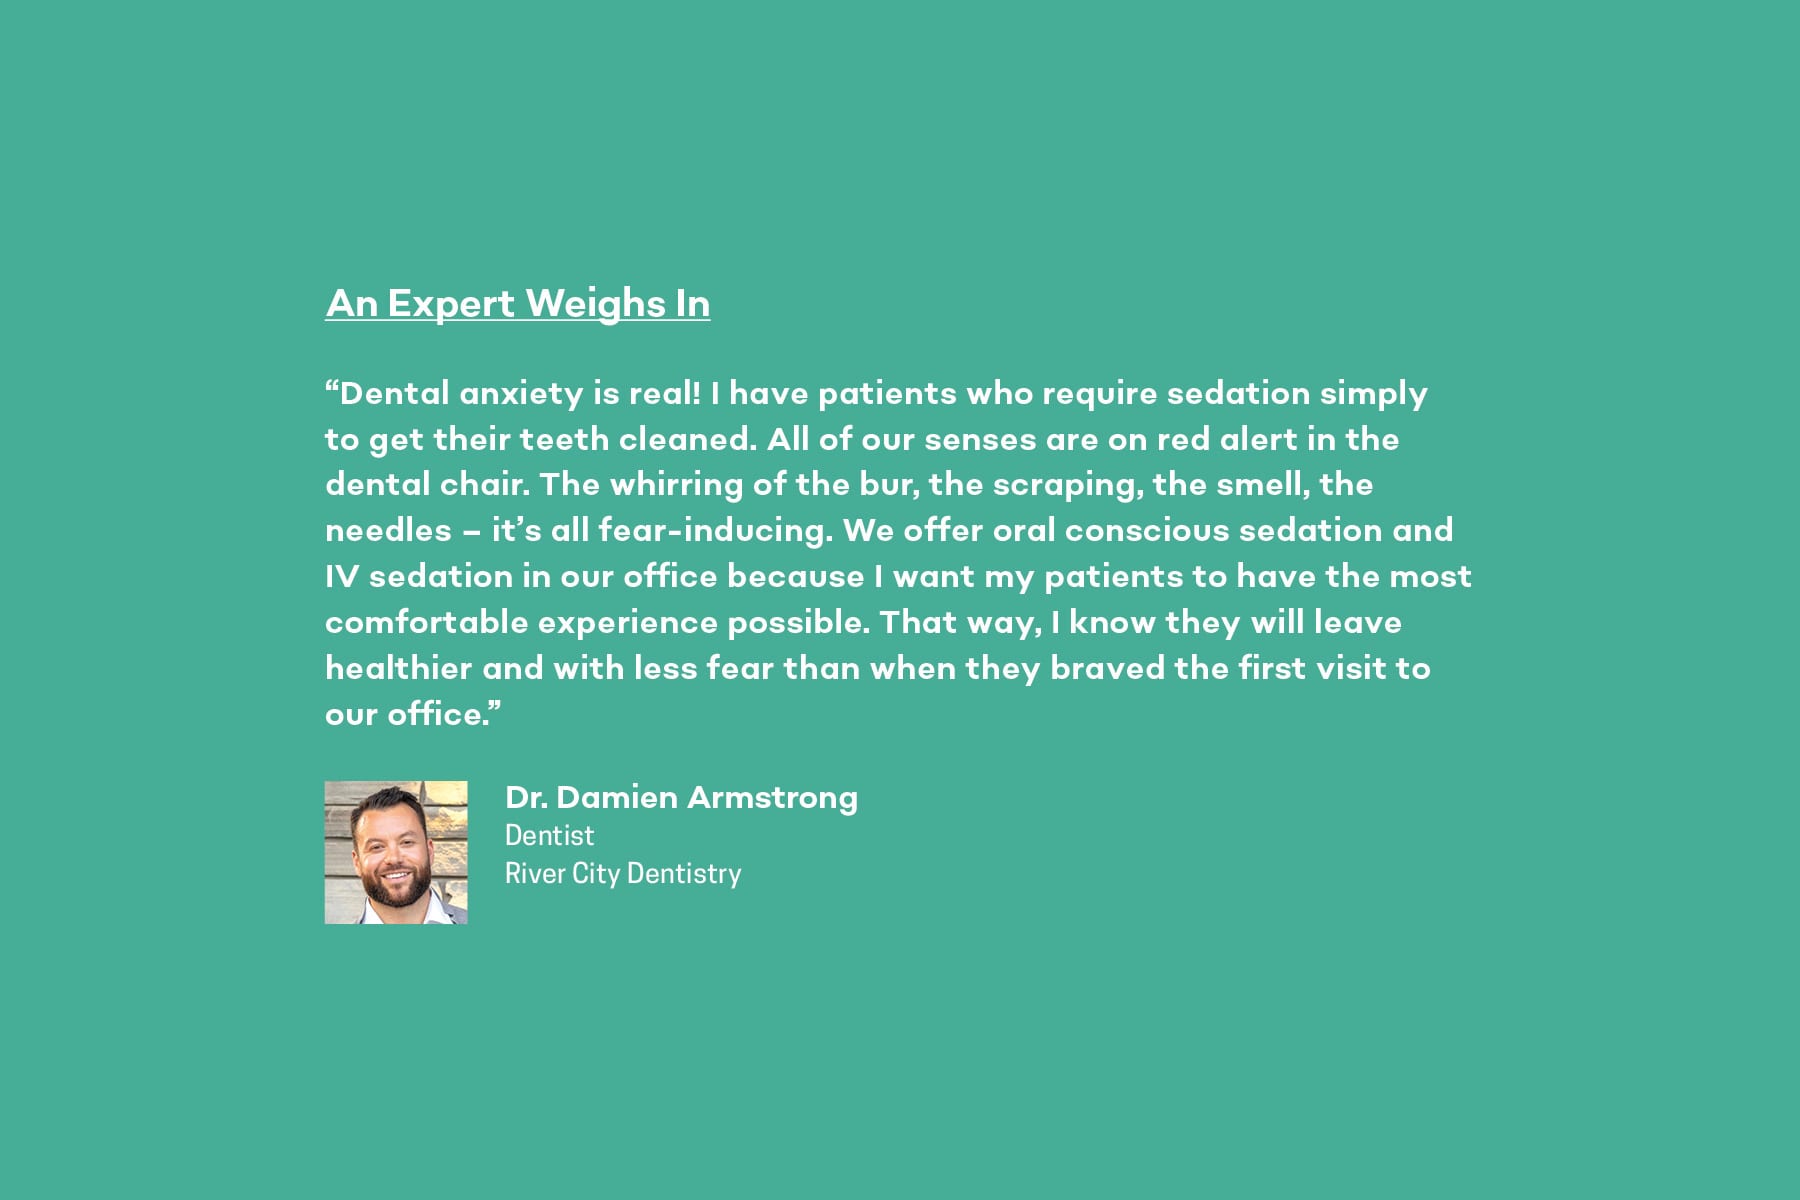 Expert quote from Dr. Damien Armstrong about dental anxity